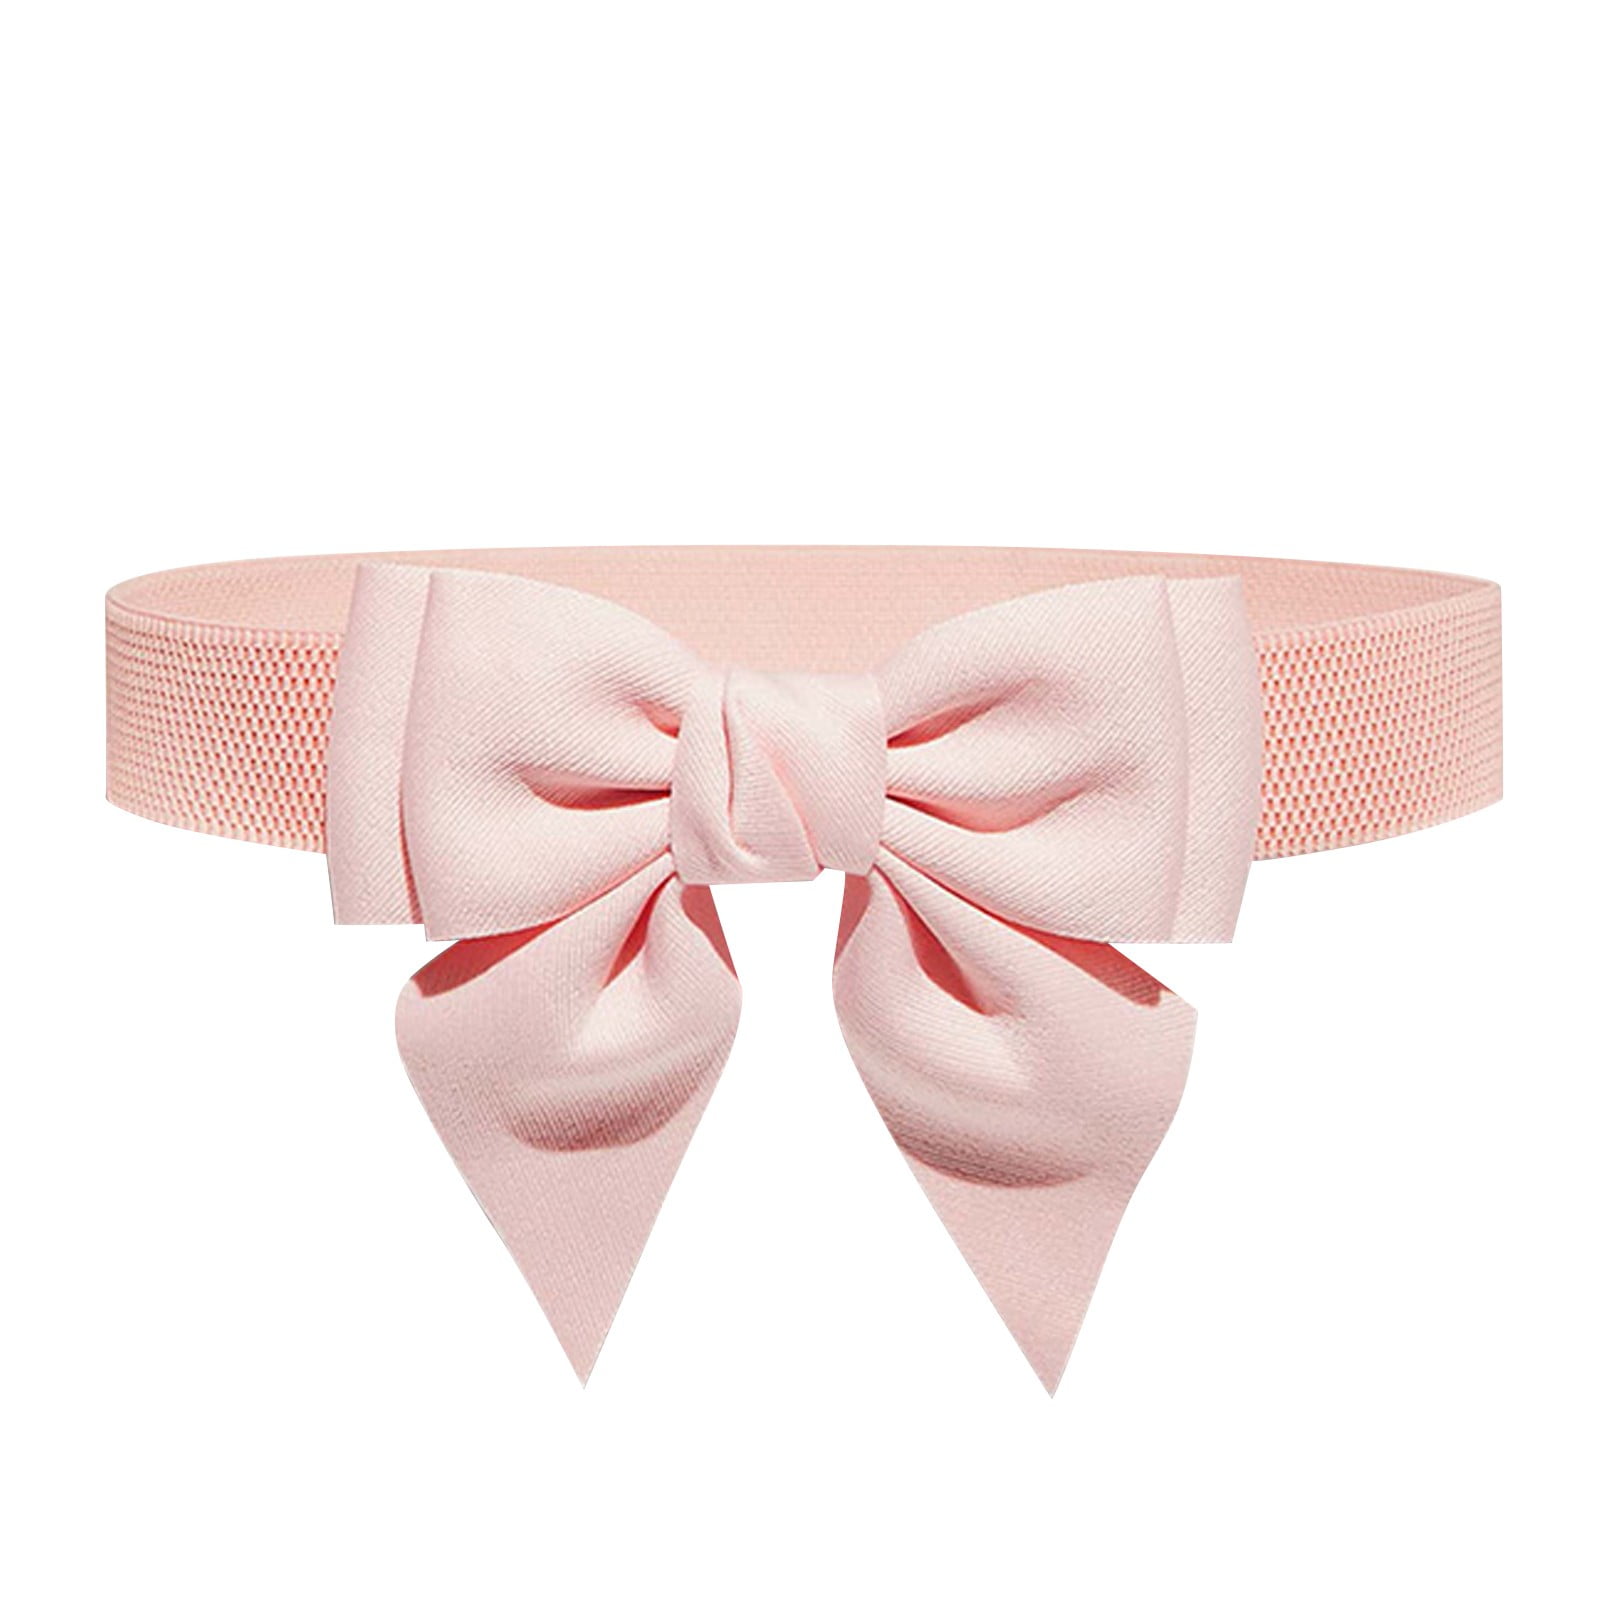 Puawkoer Women Cute Bow Wide Elastic Waist Belt Adorable Dress Accessory  Clothing Shoes & Accessories One Size Red